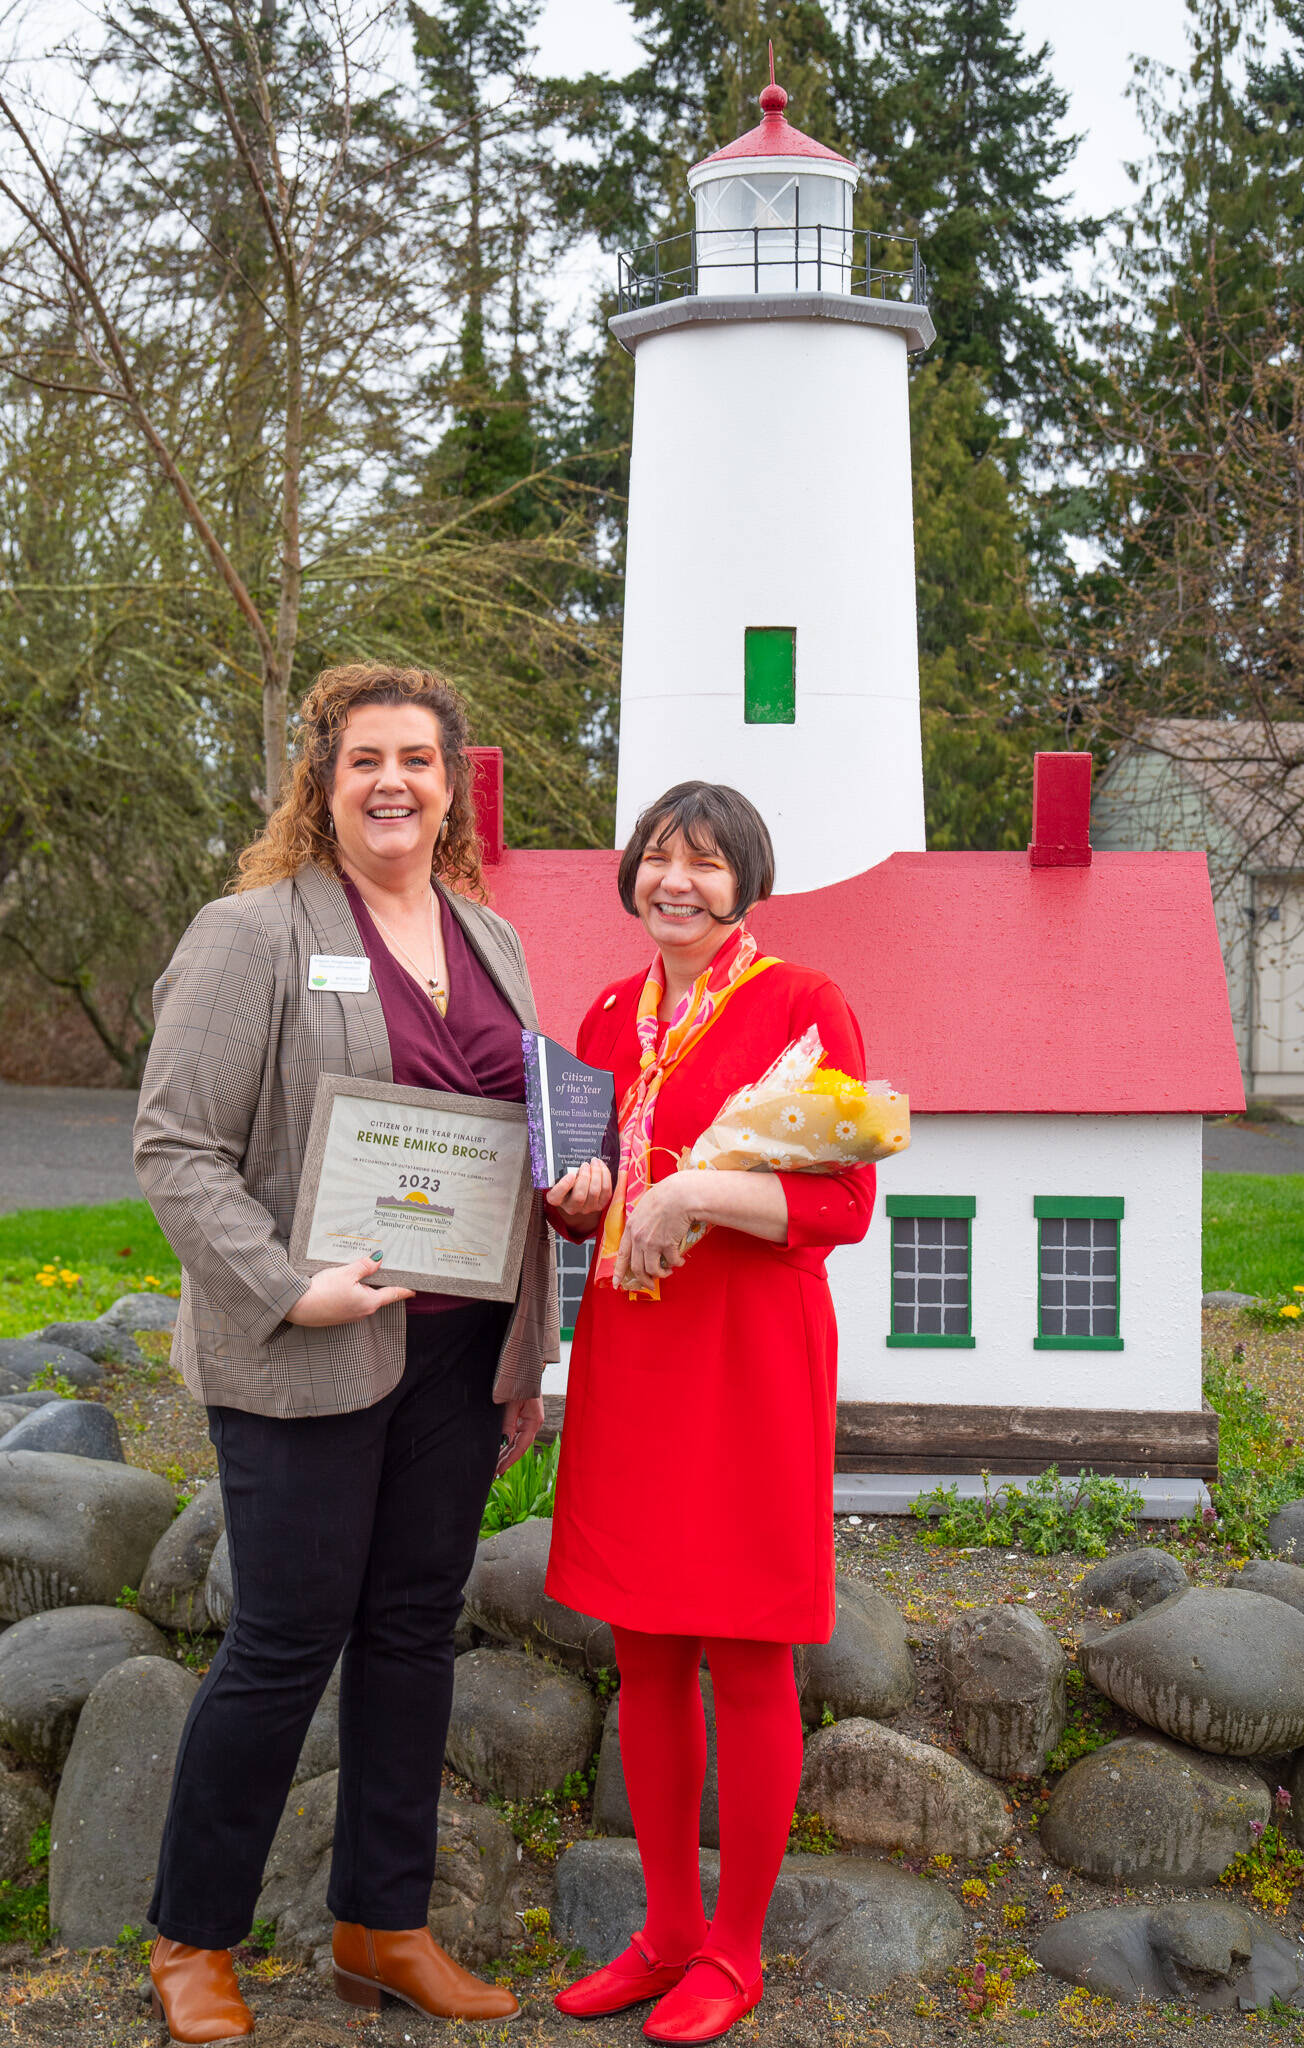 Beth Pratt, executive director of the Sequim-Dungeness Chamber of Commerce, presents Renne Emiko Brock with her 2023 Citizen of the Year award, which Pratt says is “built around celebrating volunteerism and the spirit of collaborations.”